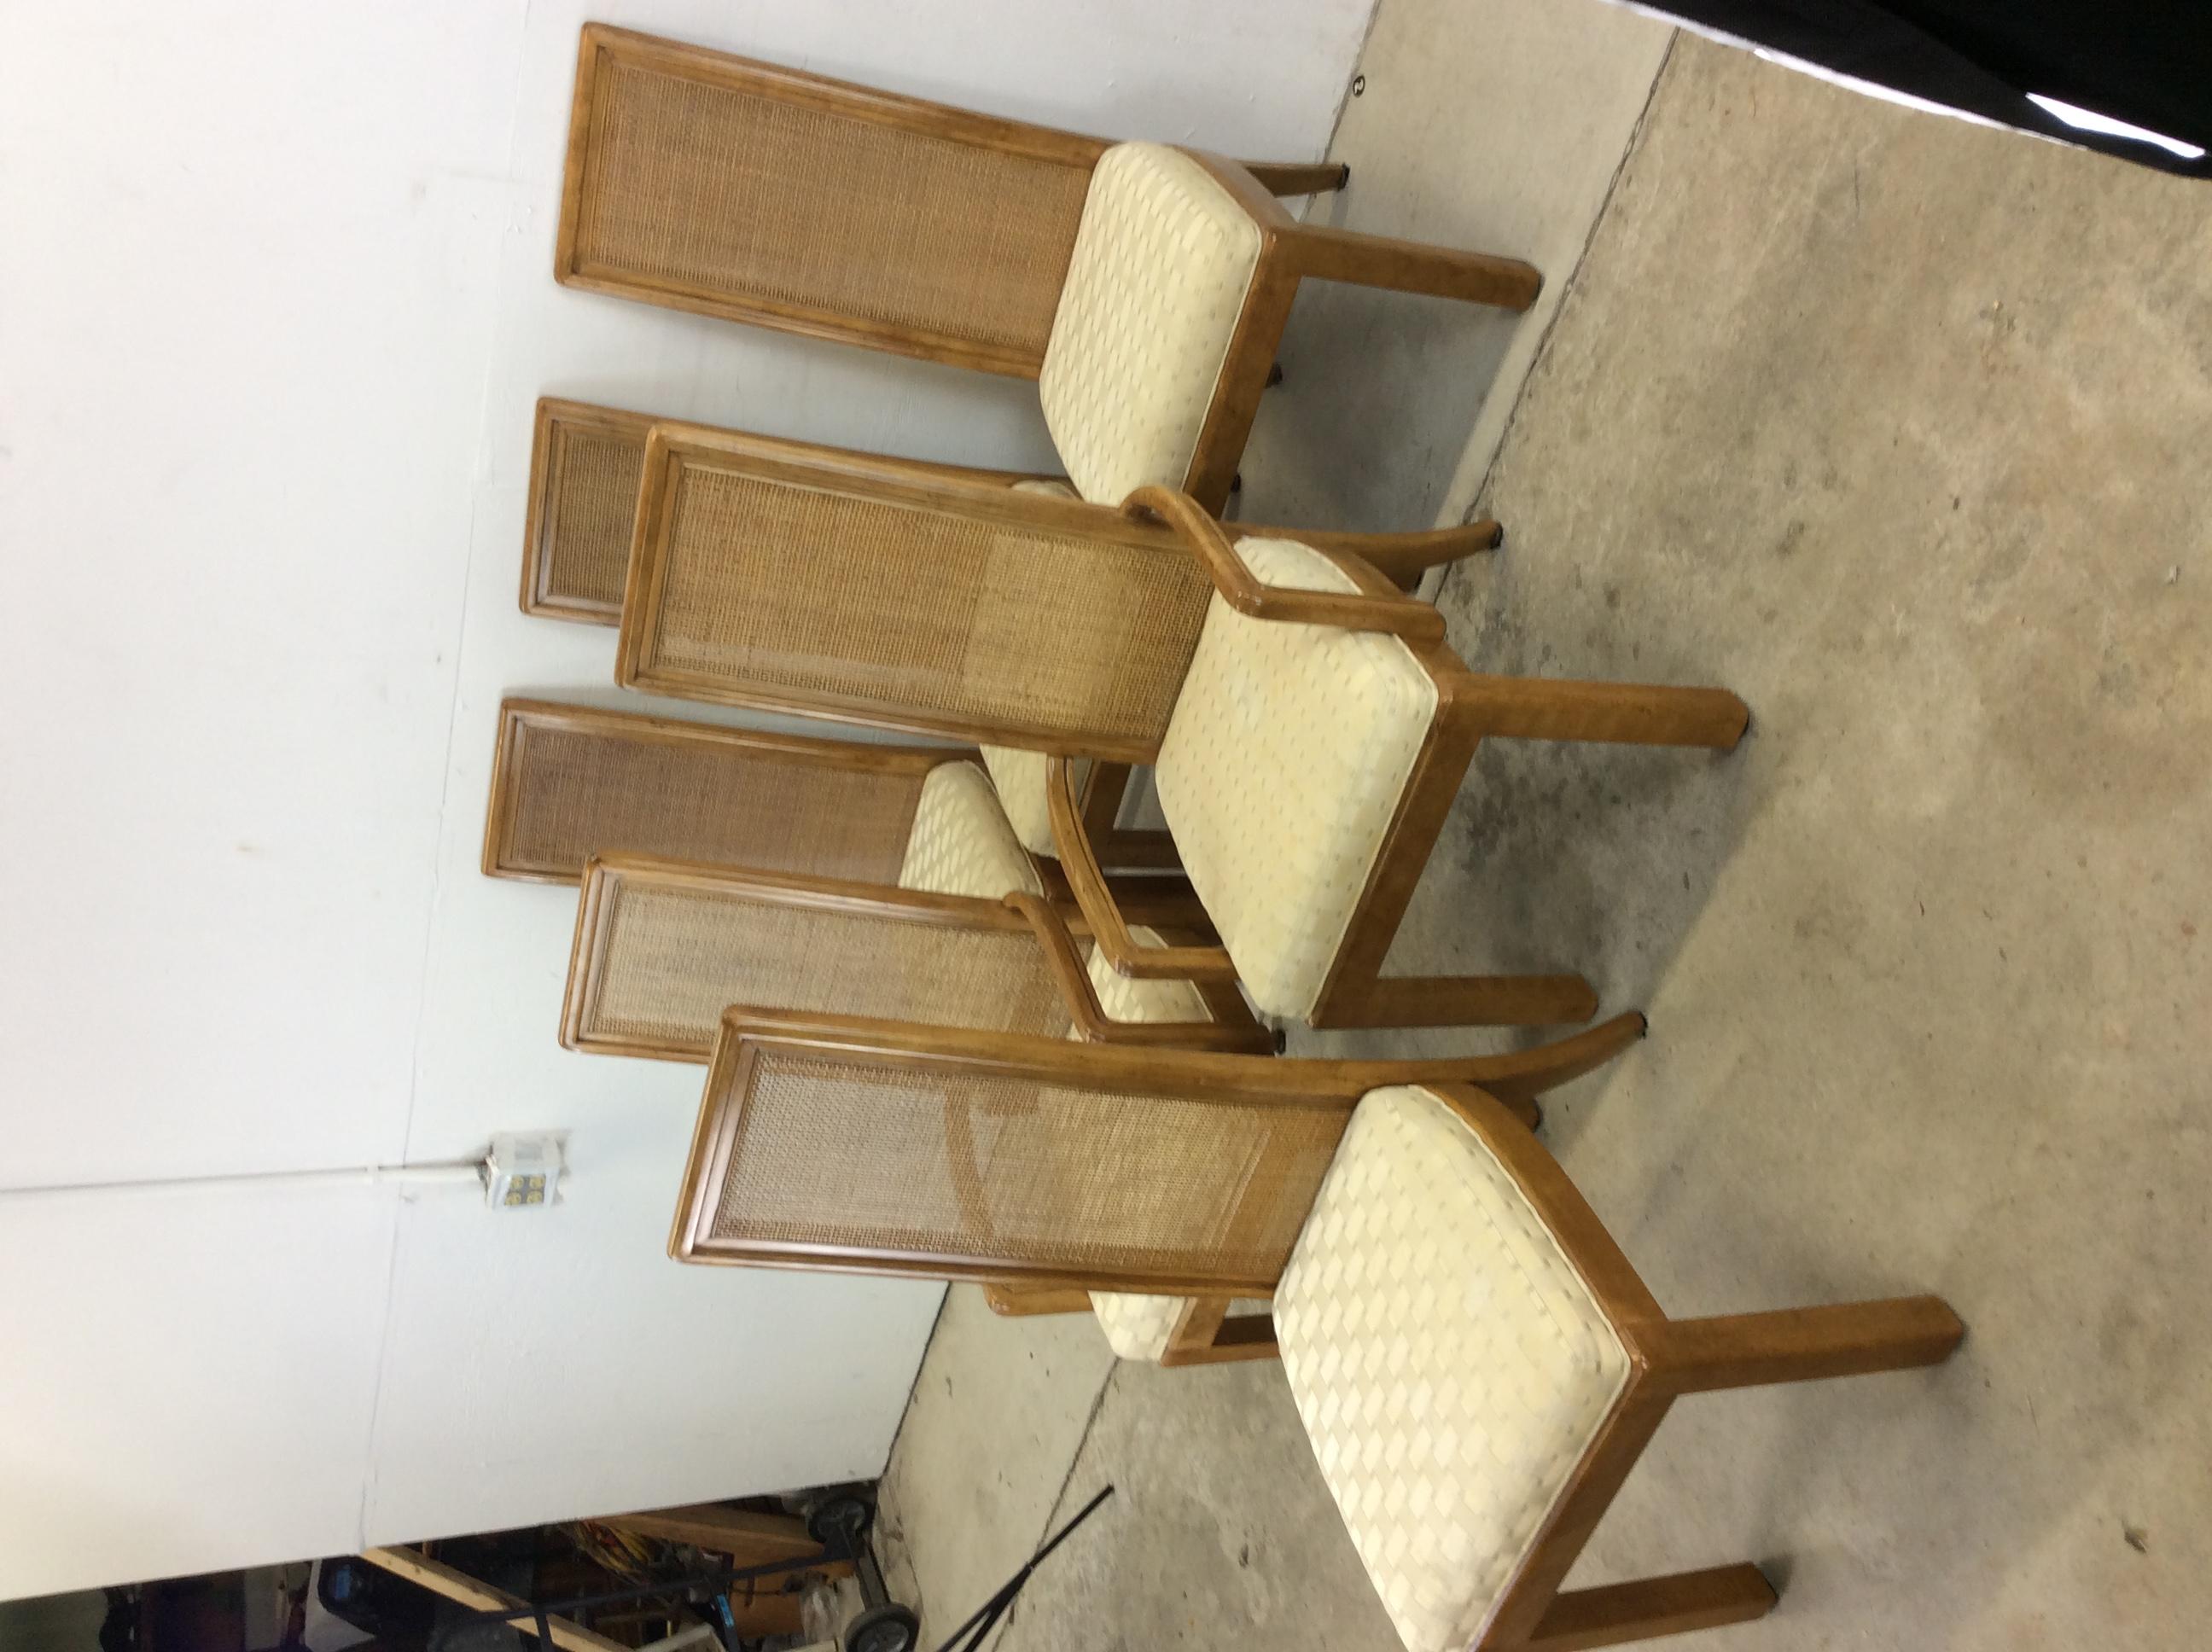 tall cane back dining chairs